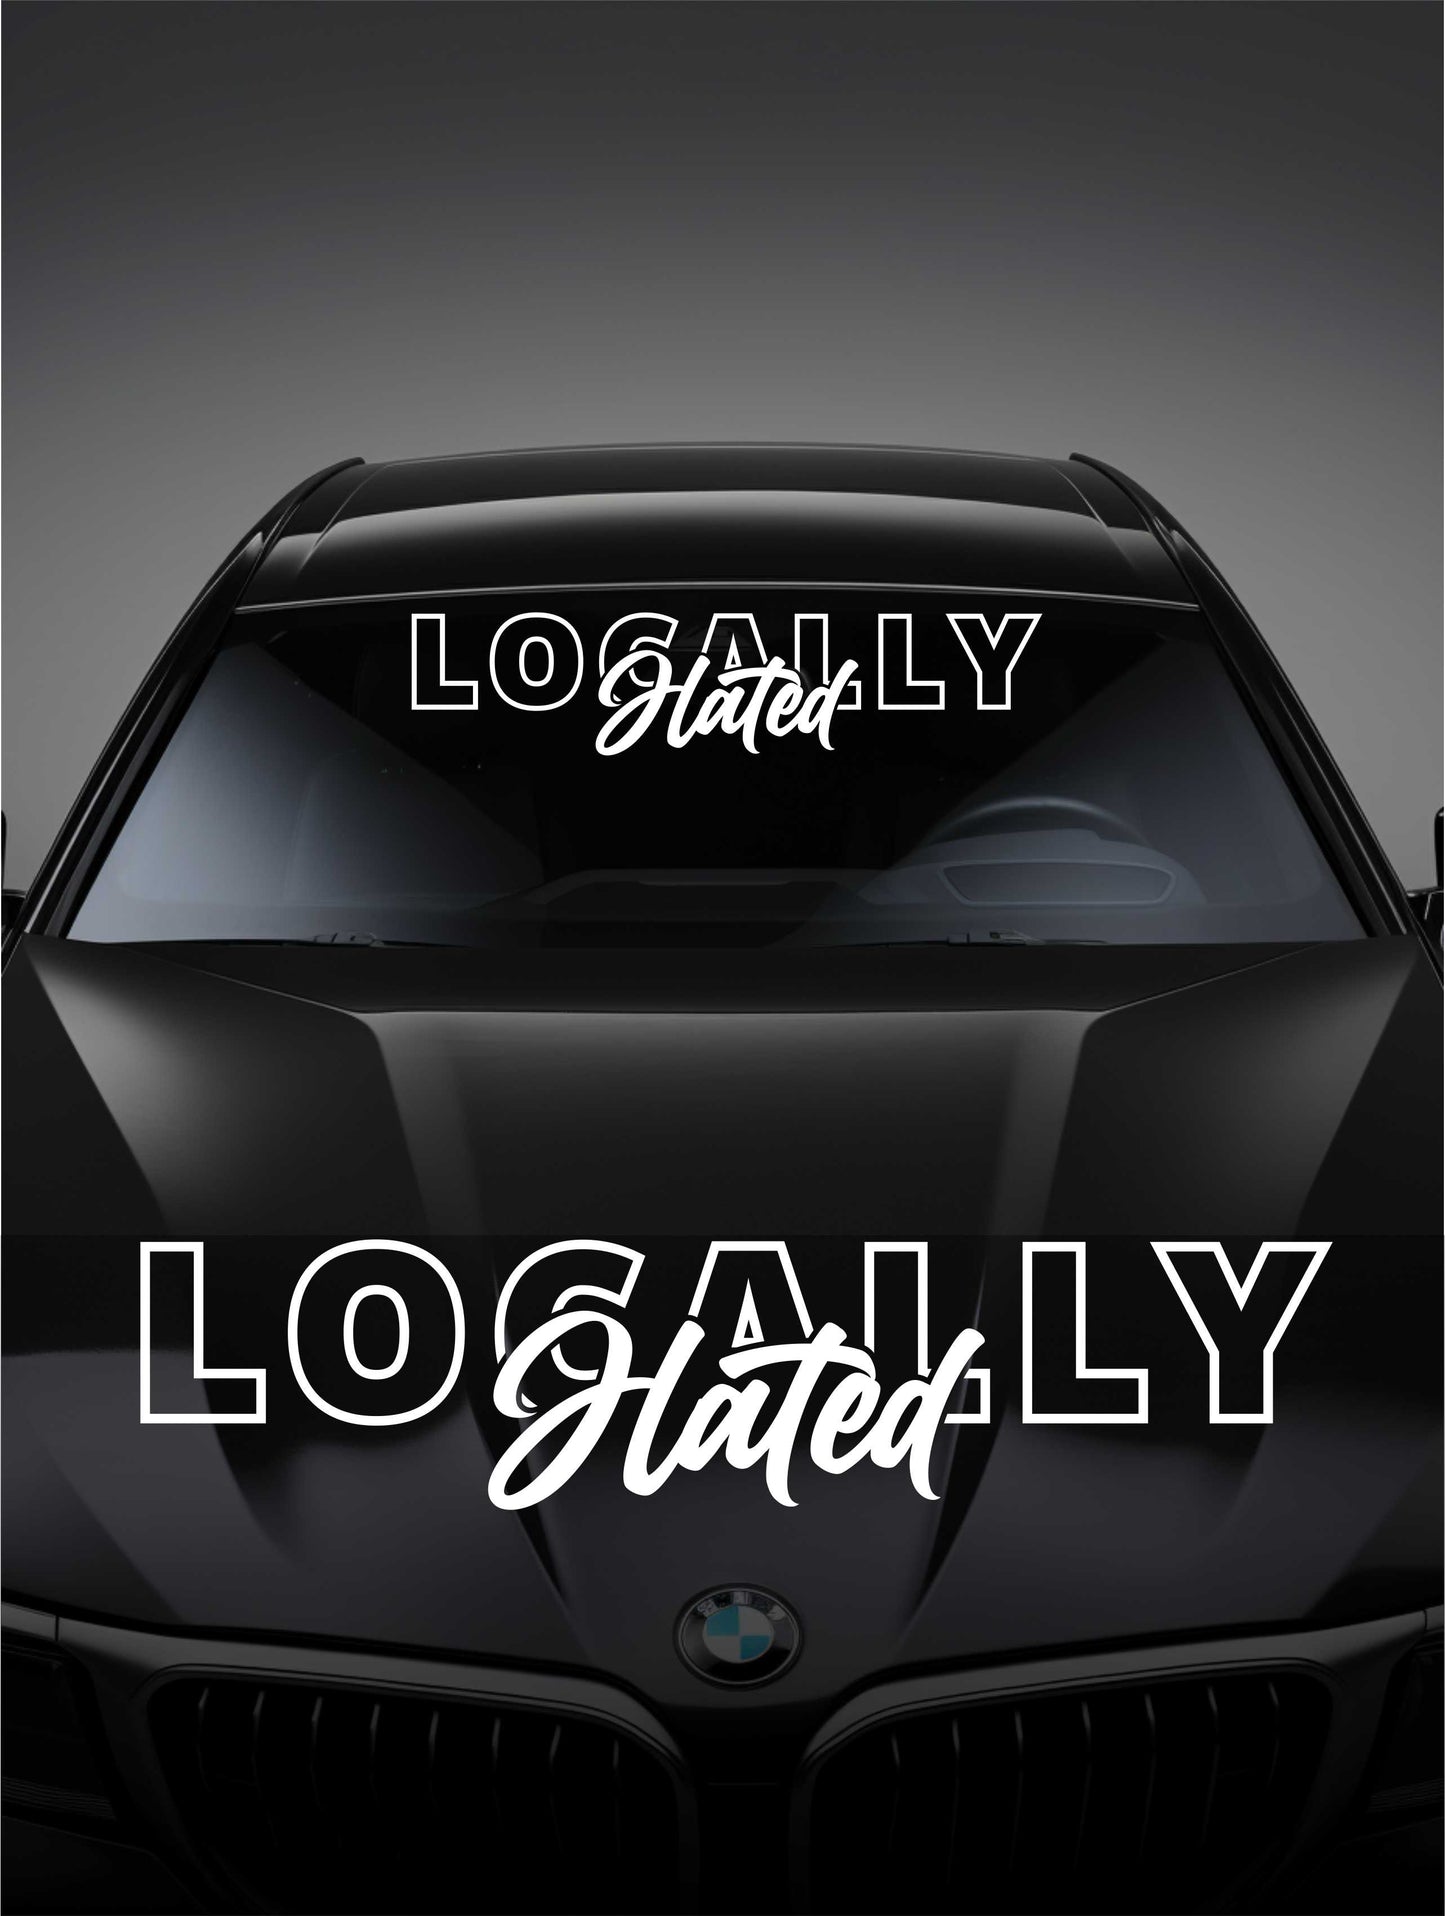 ''Locally Hated'' - Plotted Vinyl Banner Decal